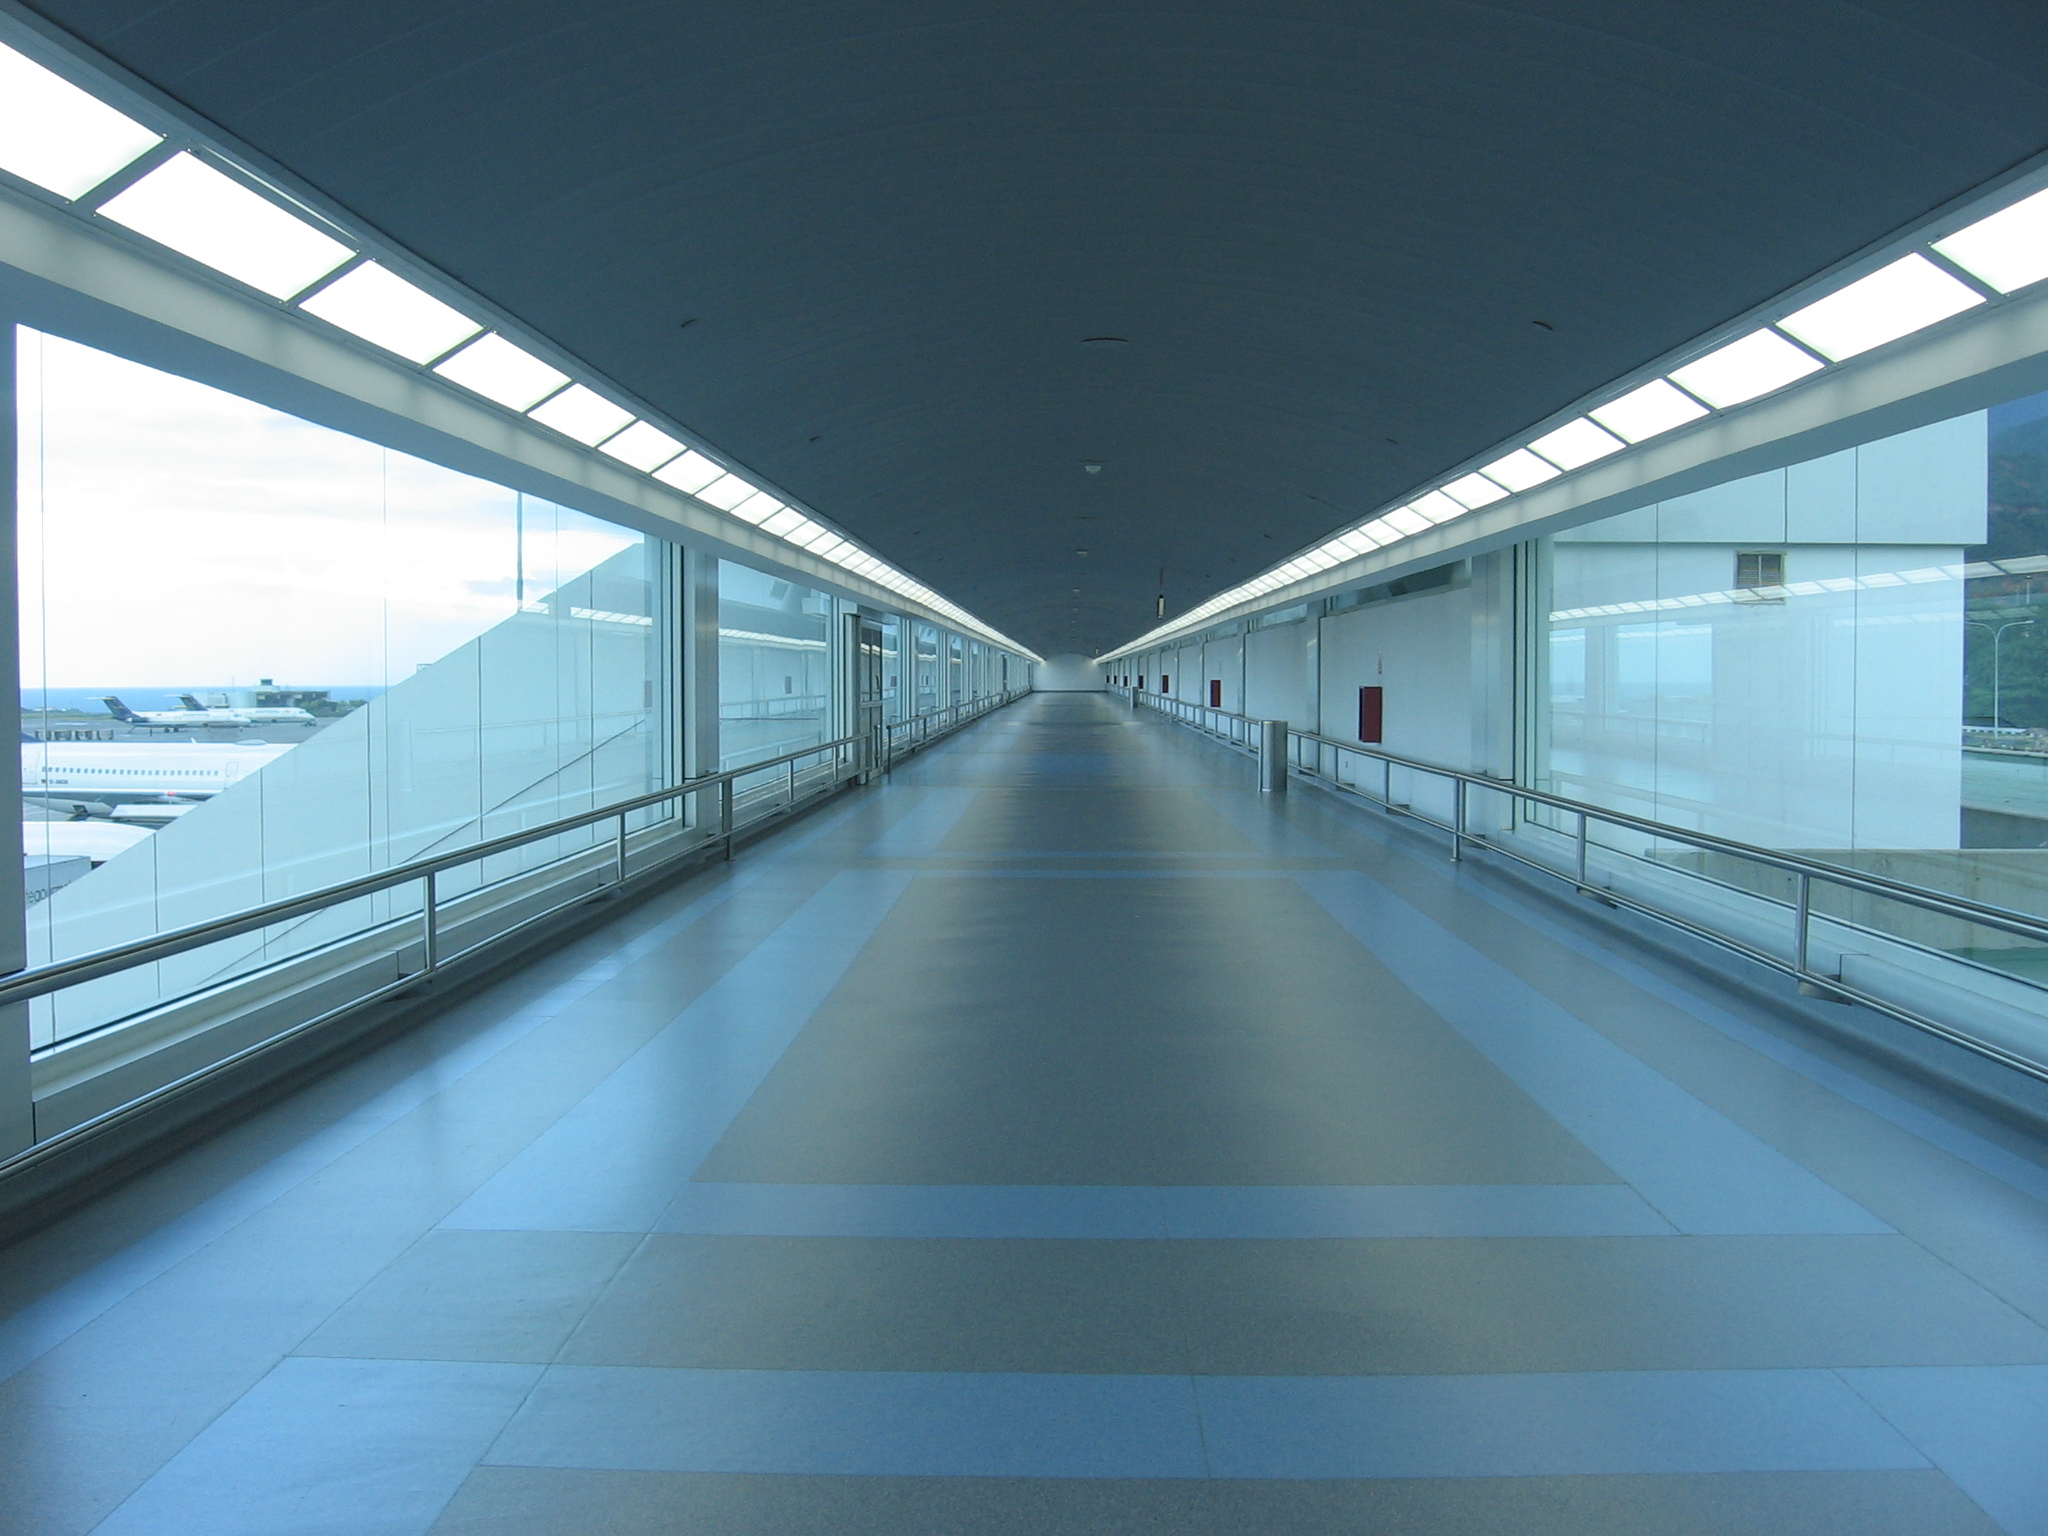 Empty airport hallway, lined with windows. The ground is grey with thick blue lines. 